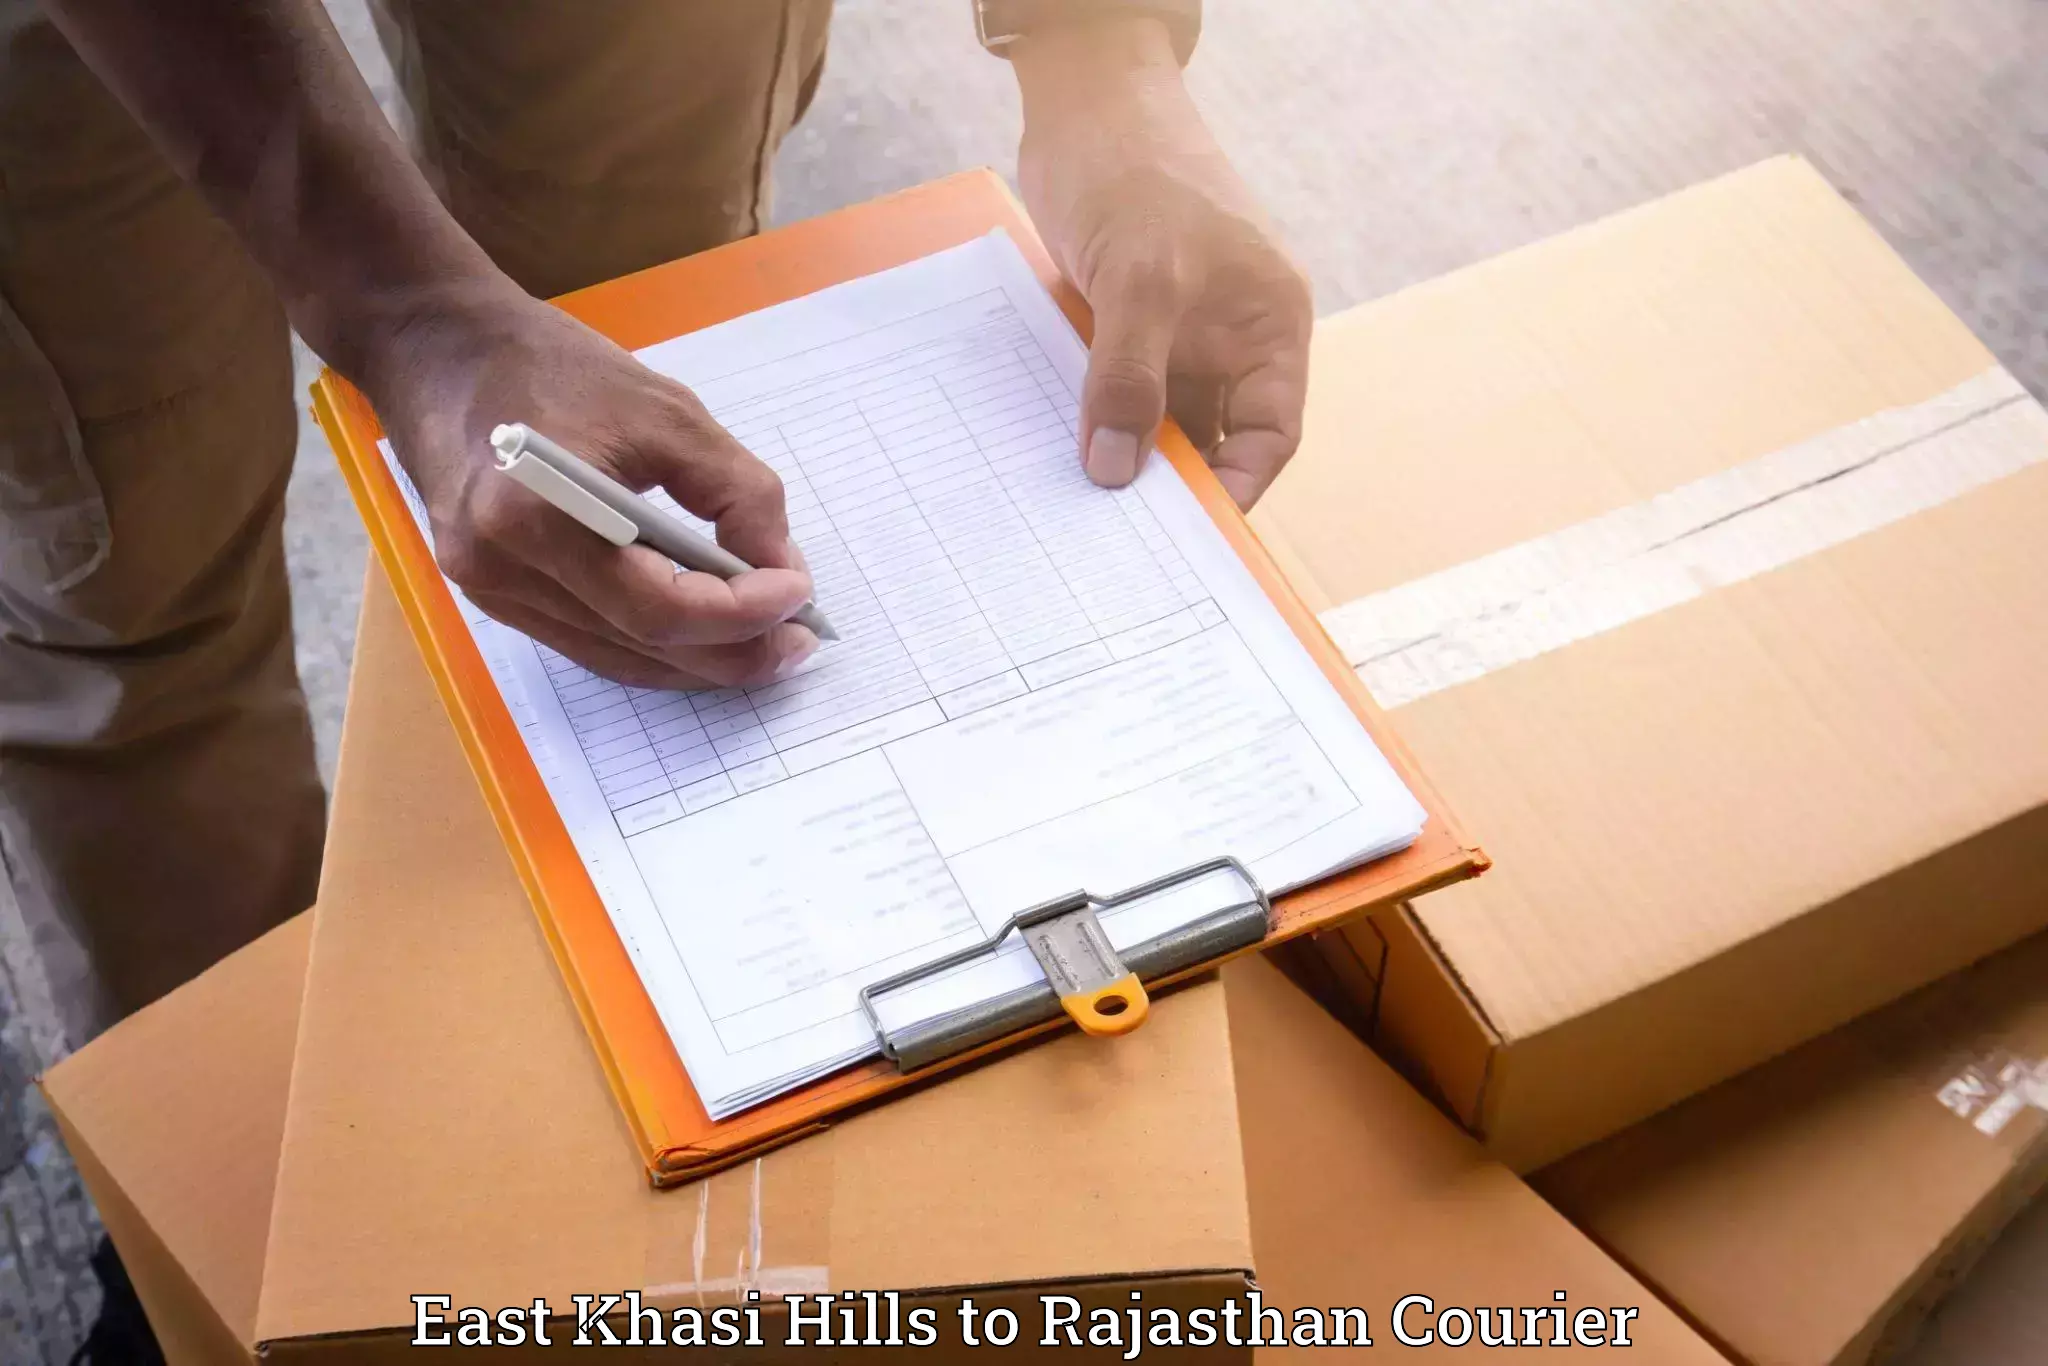 Professional movers East Khasi Hills to Dausa